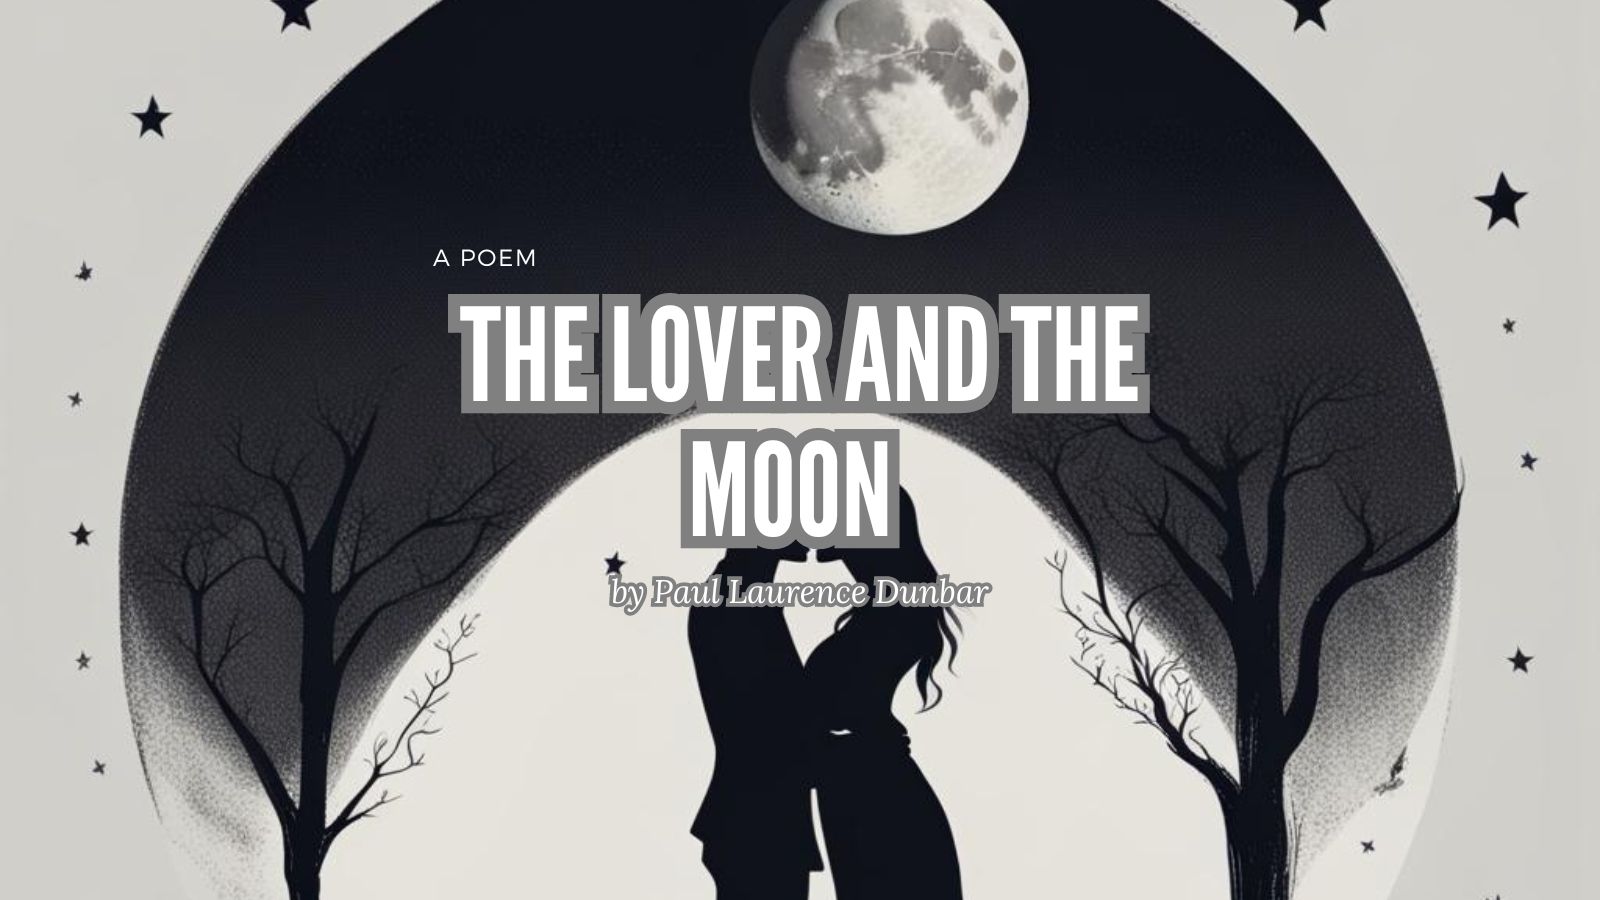 The Lover and the Moon by Paul Laurence Dunbar